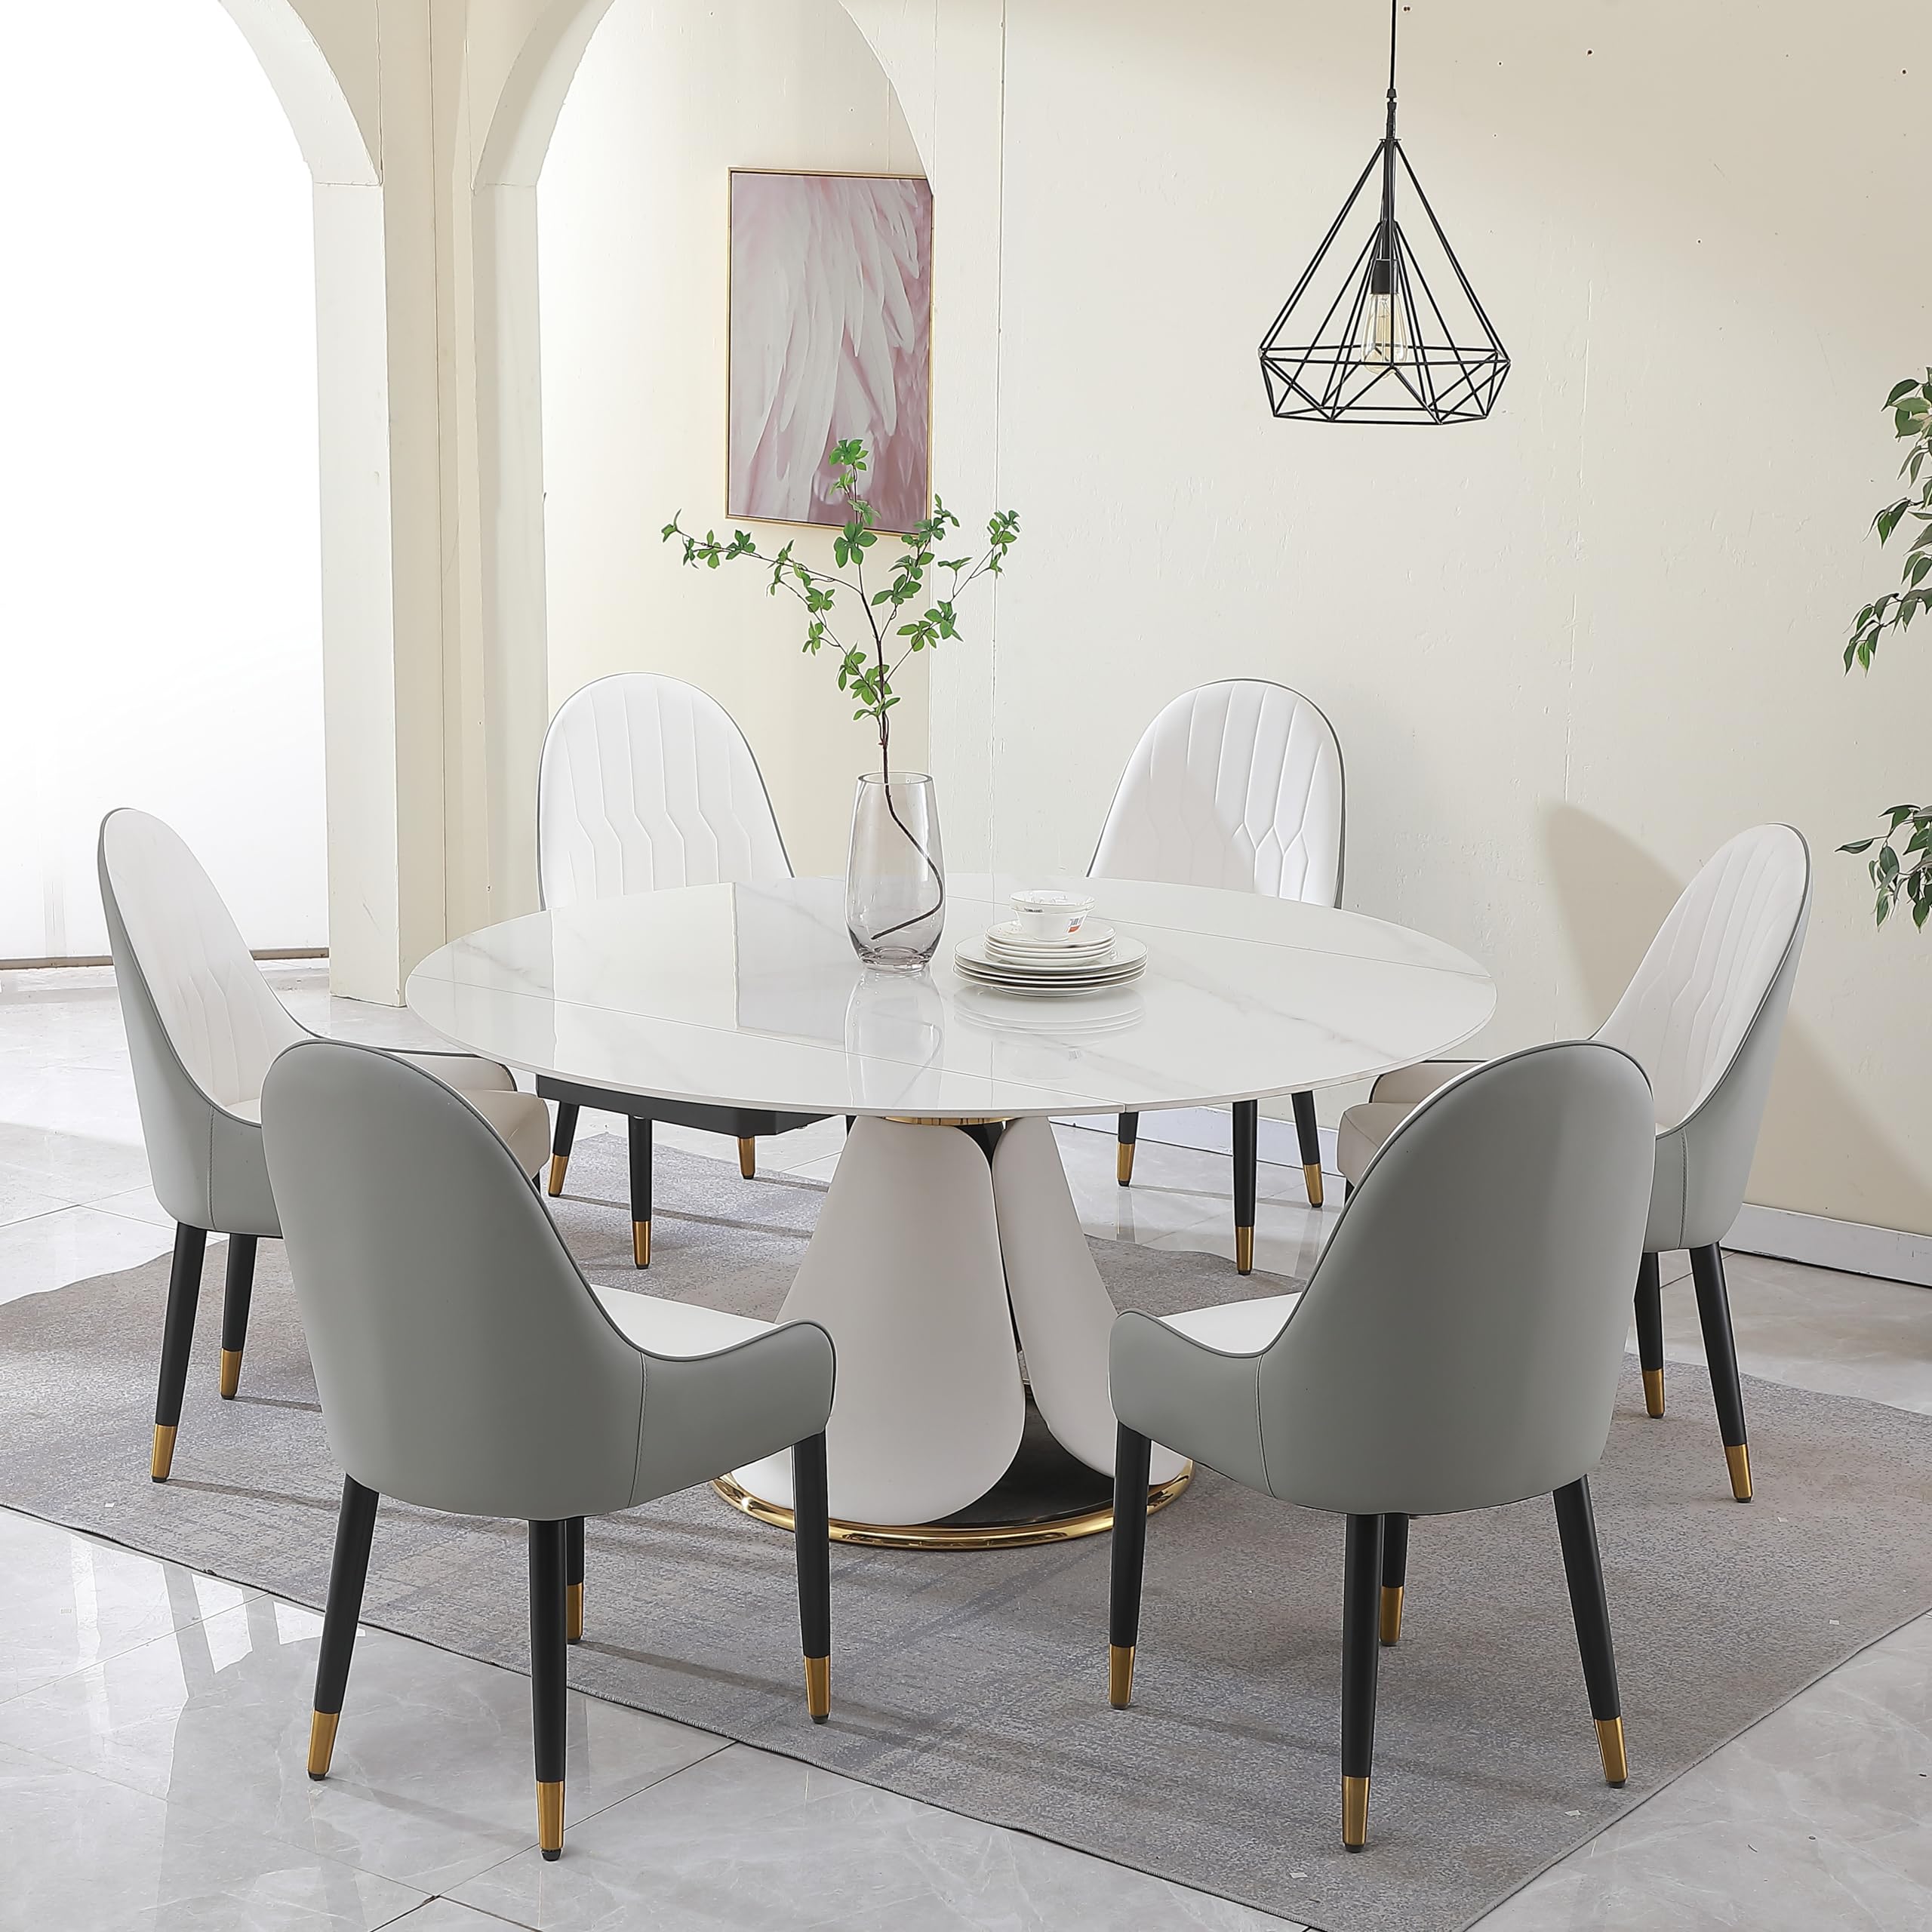 Montary 59.05" with 31.5" Round Turntable Sintered Stone Dining Table Set for 6 Gray Chairs